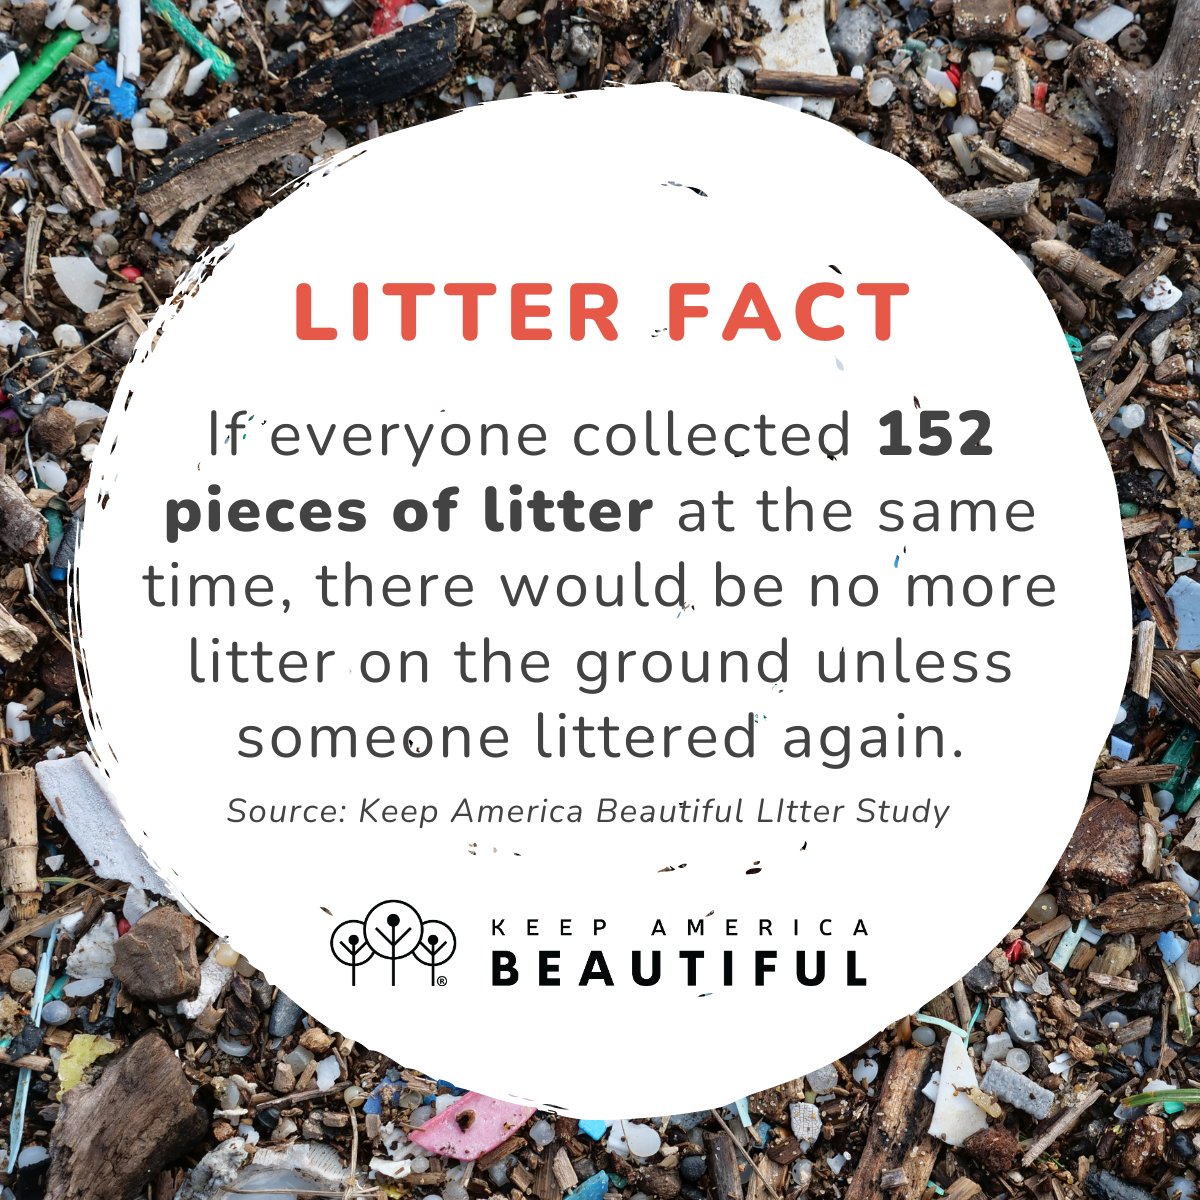 This litter fact has us like 😱 YOU can make a big impact this year during the #GreatAmericanCleanup - join the #152PickUpChallenge and pick up 152 pieces of litter in your community! Sign up today: bit.ly/3T5N8ZT #KeepAmericaBeautiful #DoBeautifulThings